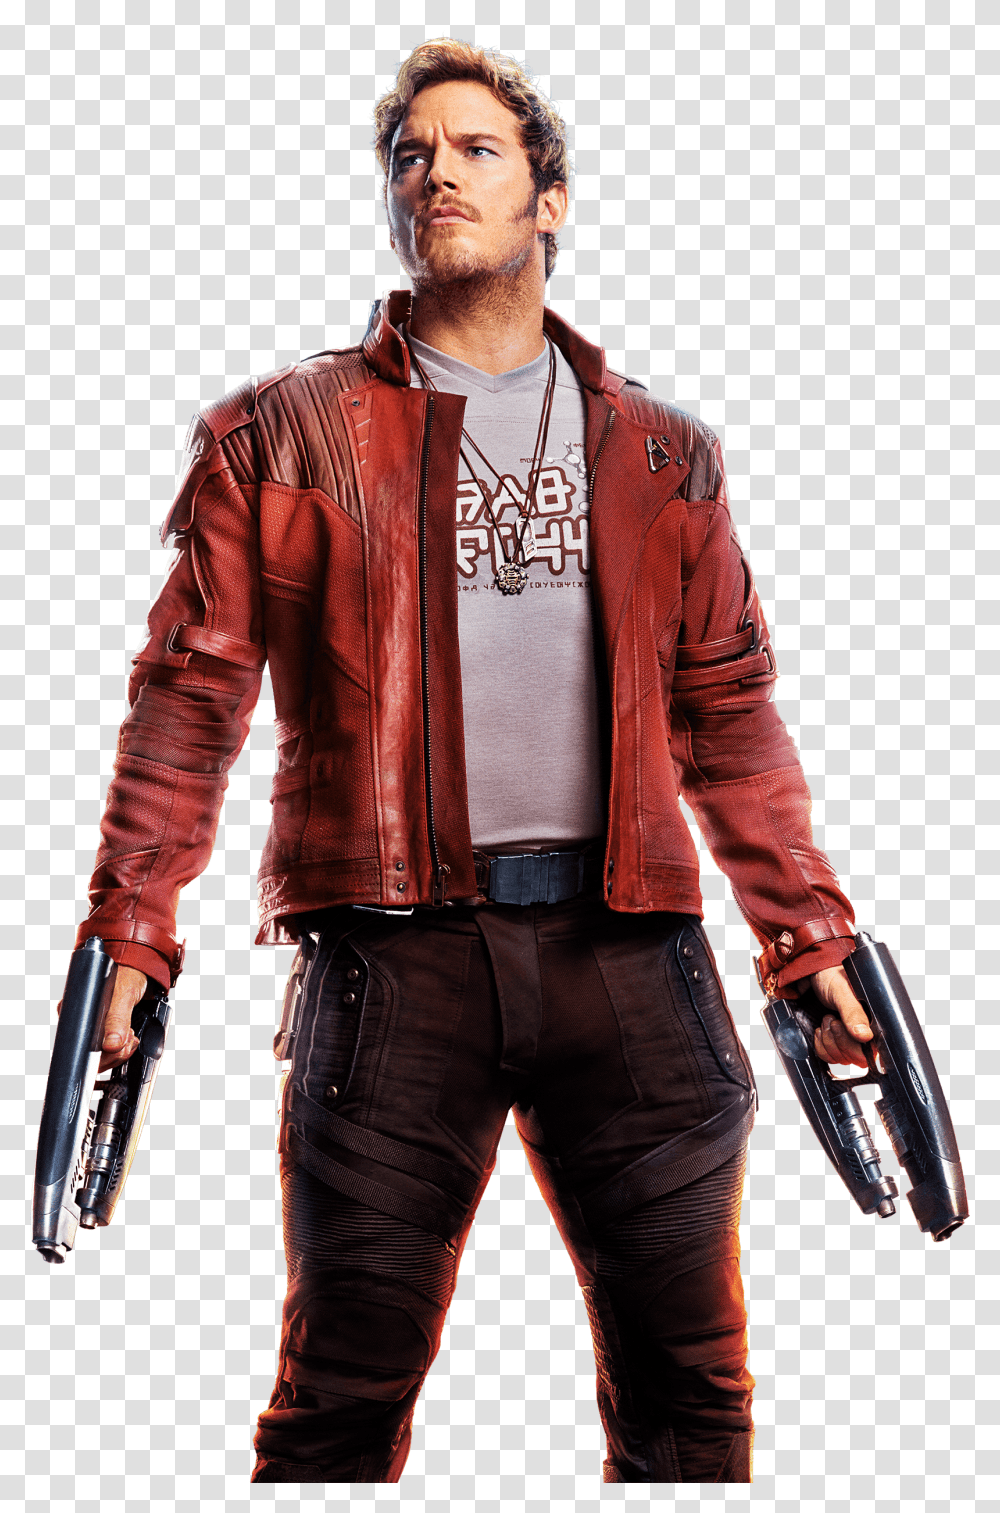 Image Starlord Peterquill Marvel Guardians Of The Galaxy 2 Star Lord, Apparel, Jacket, Coat Transparent Png